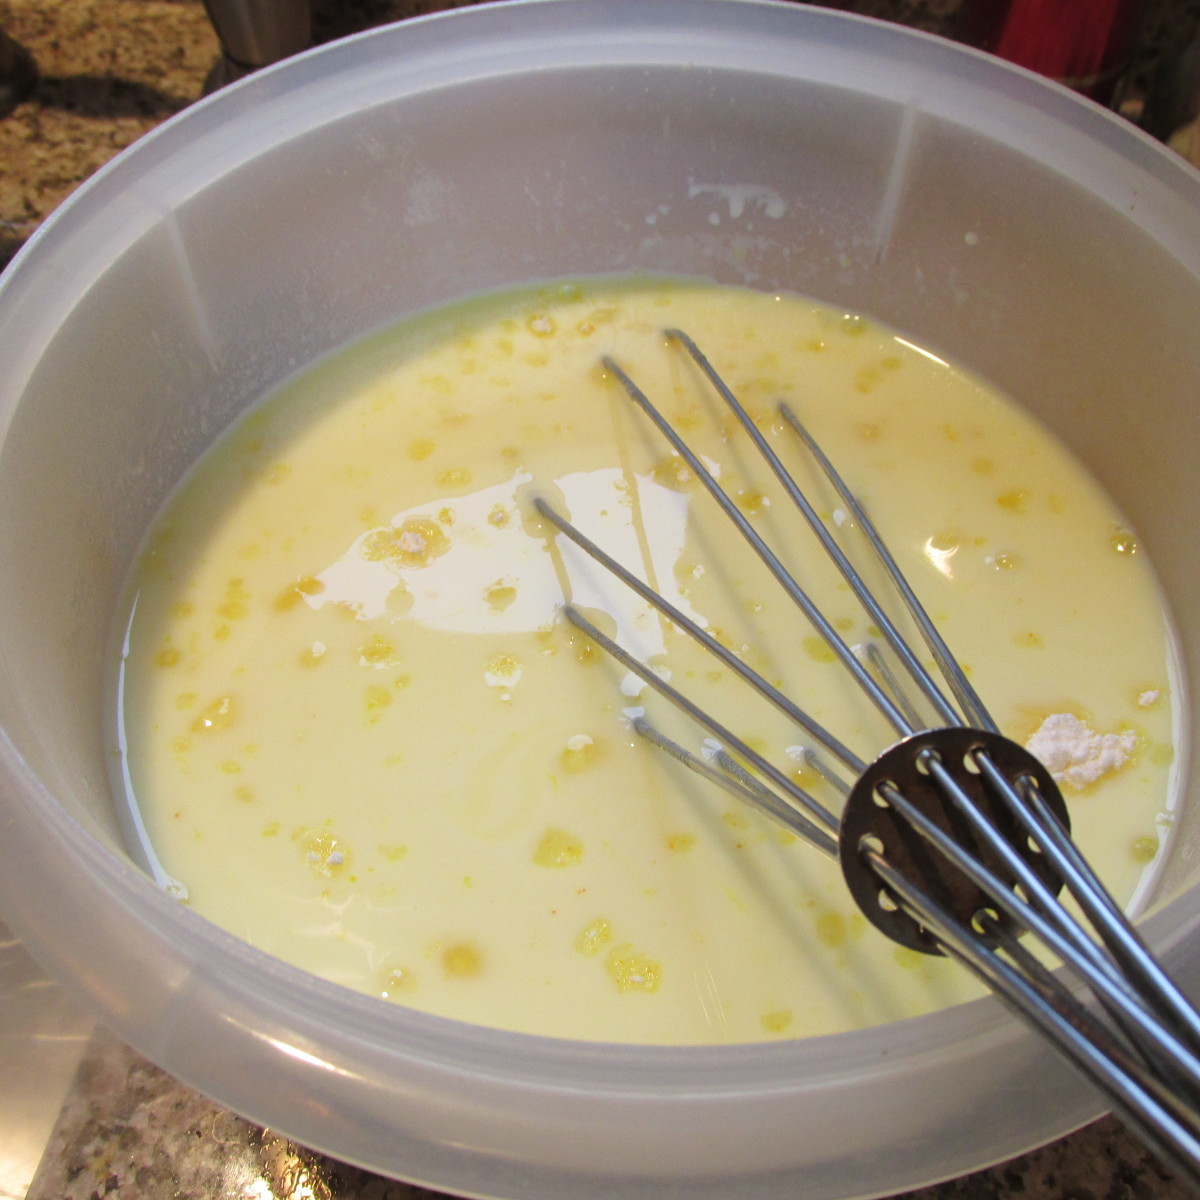 Mixing the lemon pudding and other ingredients